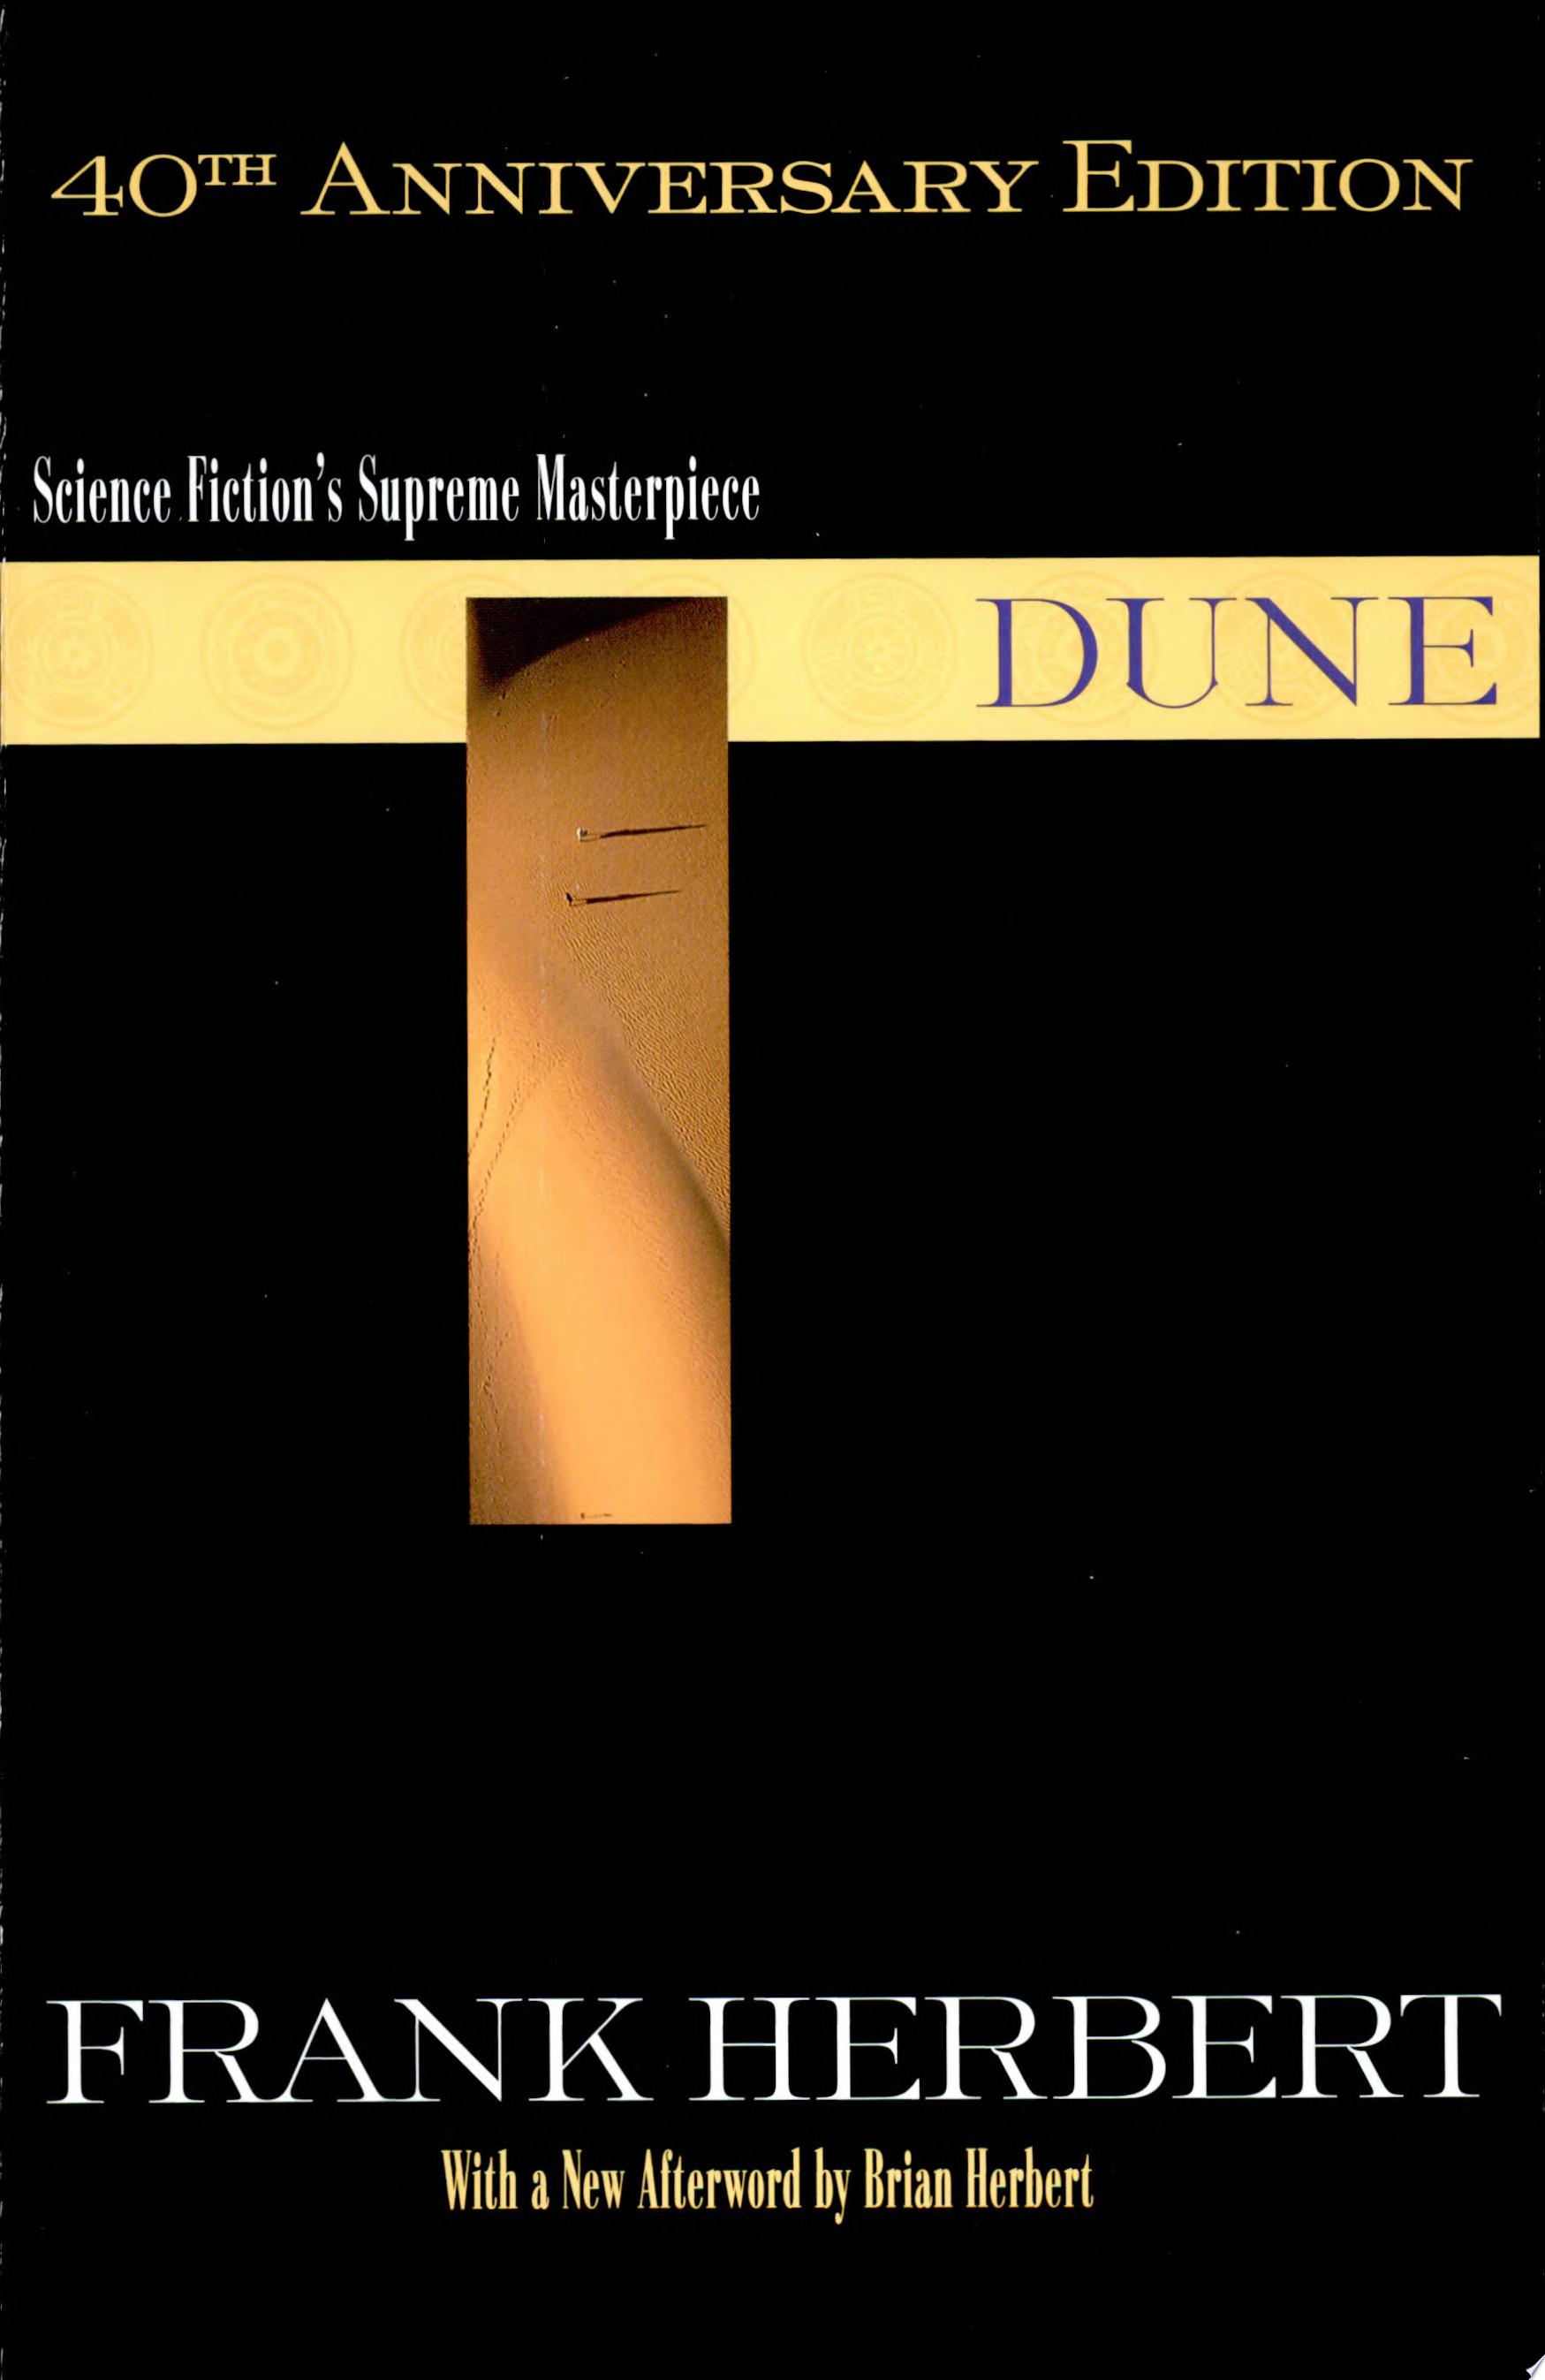 Image for "Dune"